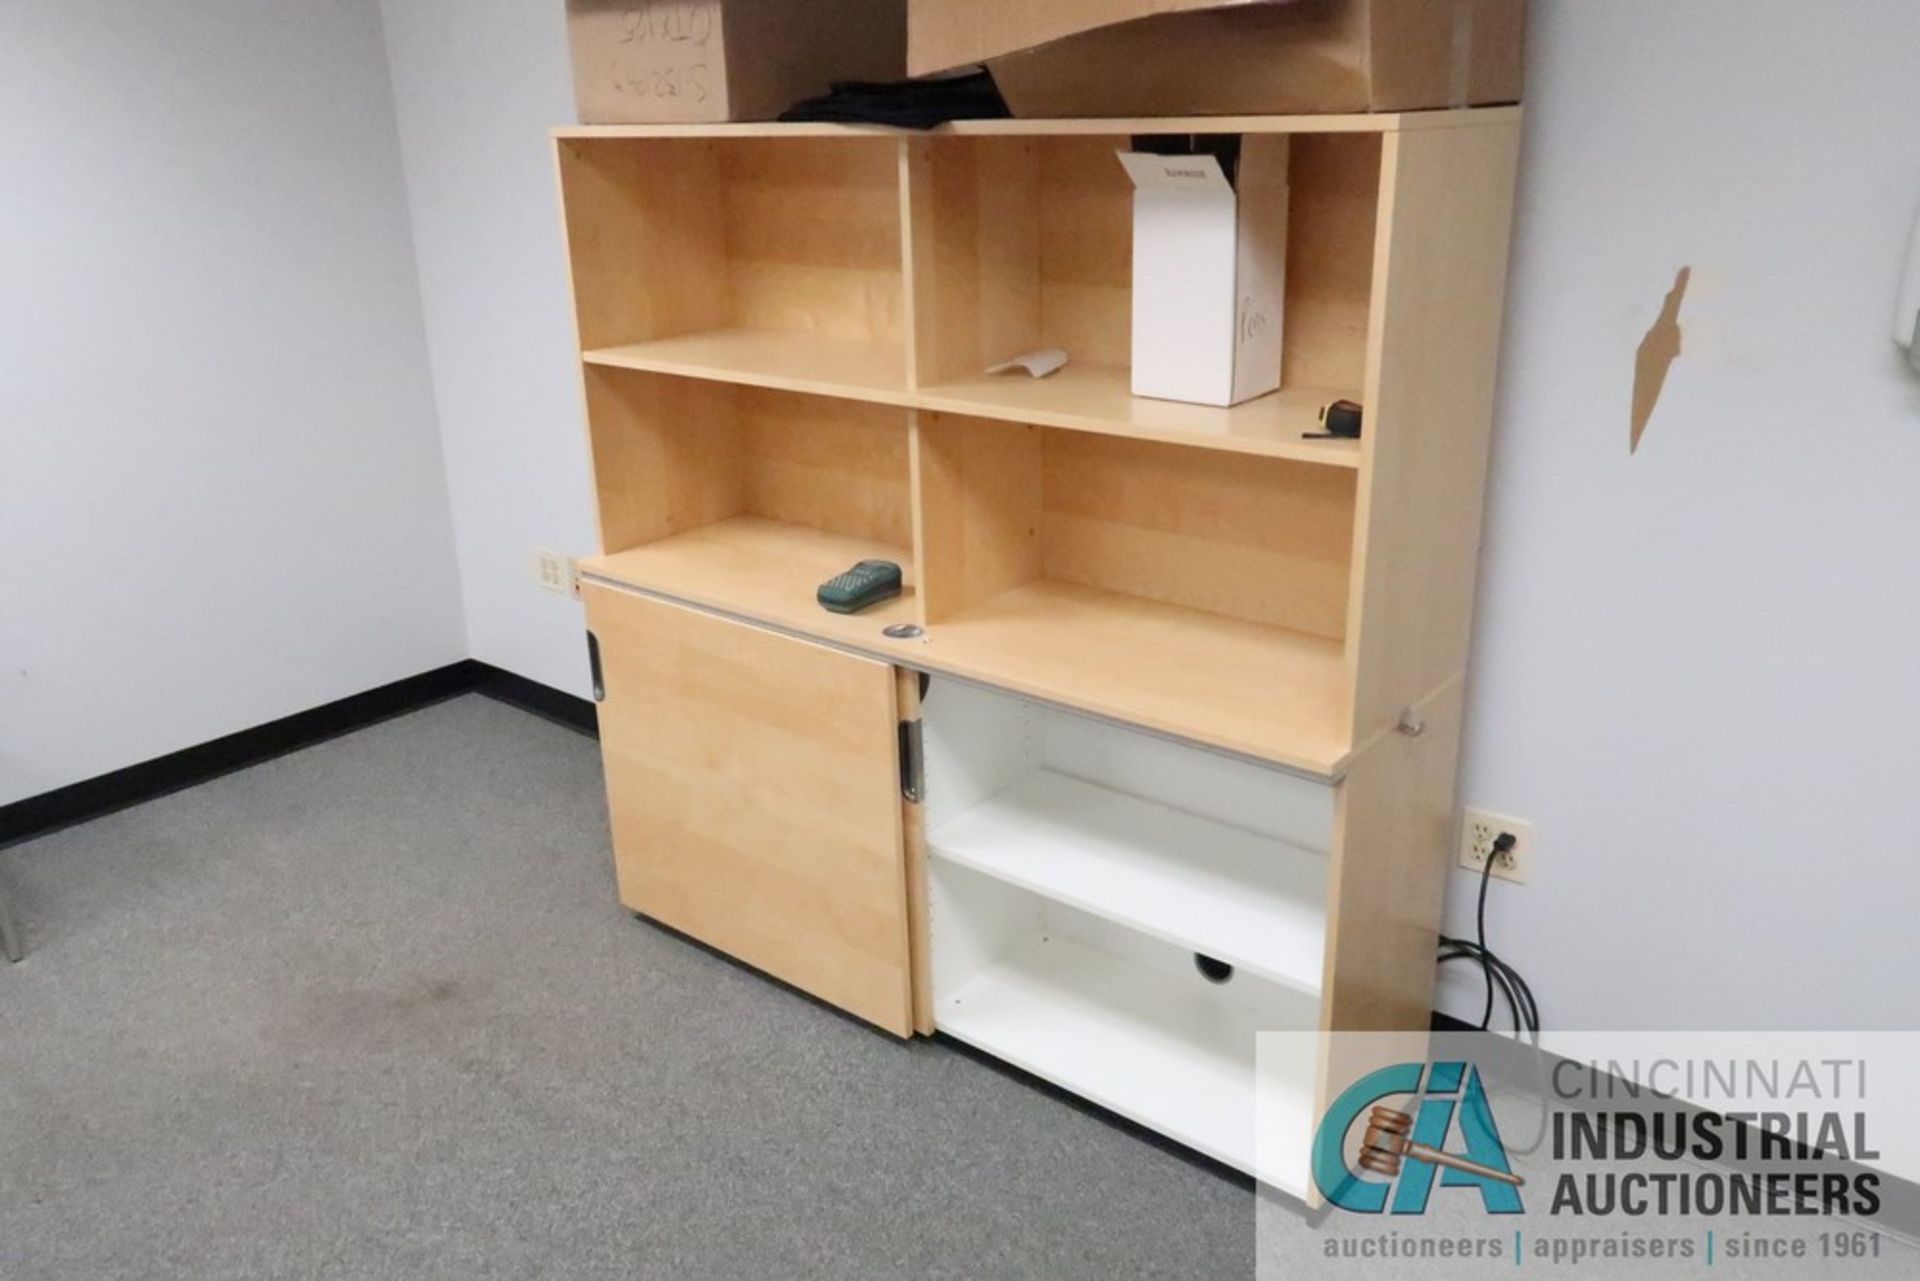 79" X 86" X 24" GALANT L-SHAPED DESK, (2) 3-DRAWER CABINETS, (1) EXECUTIVE CHAIR, (2) BOOKCASES WITH - Image 5 of 6